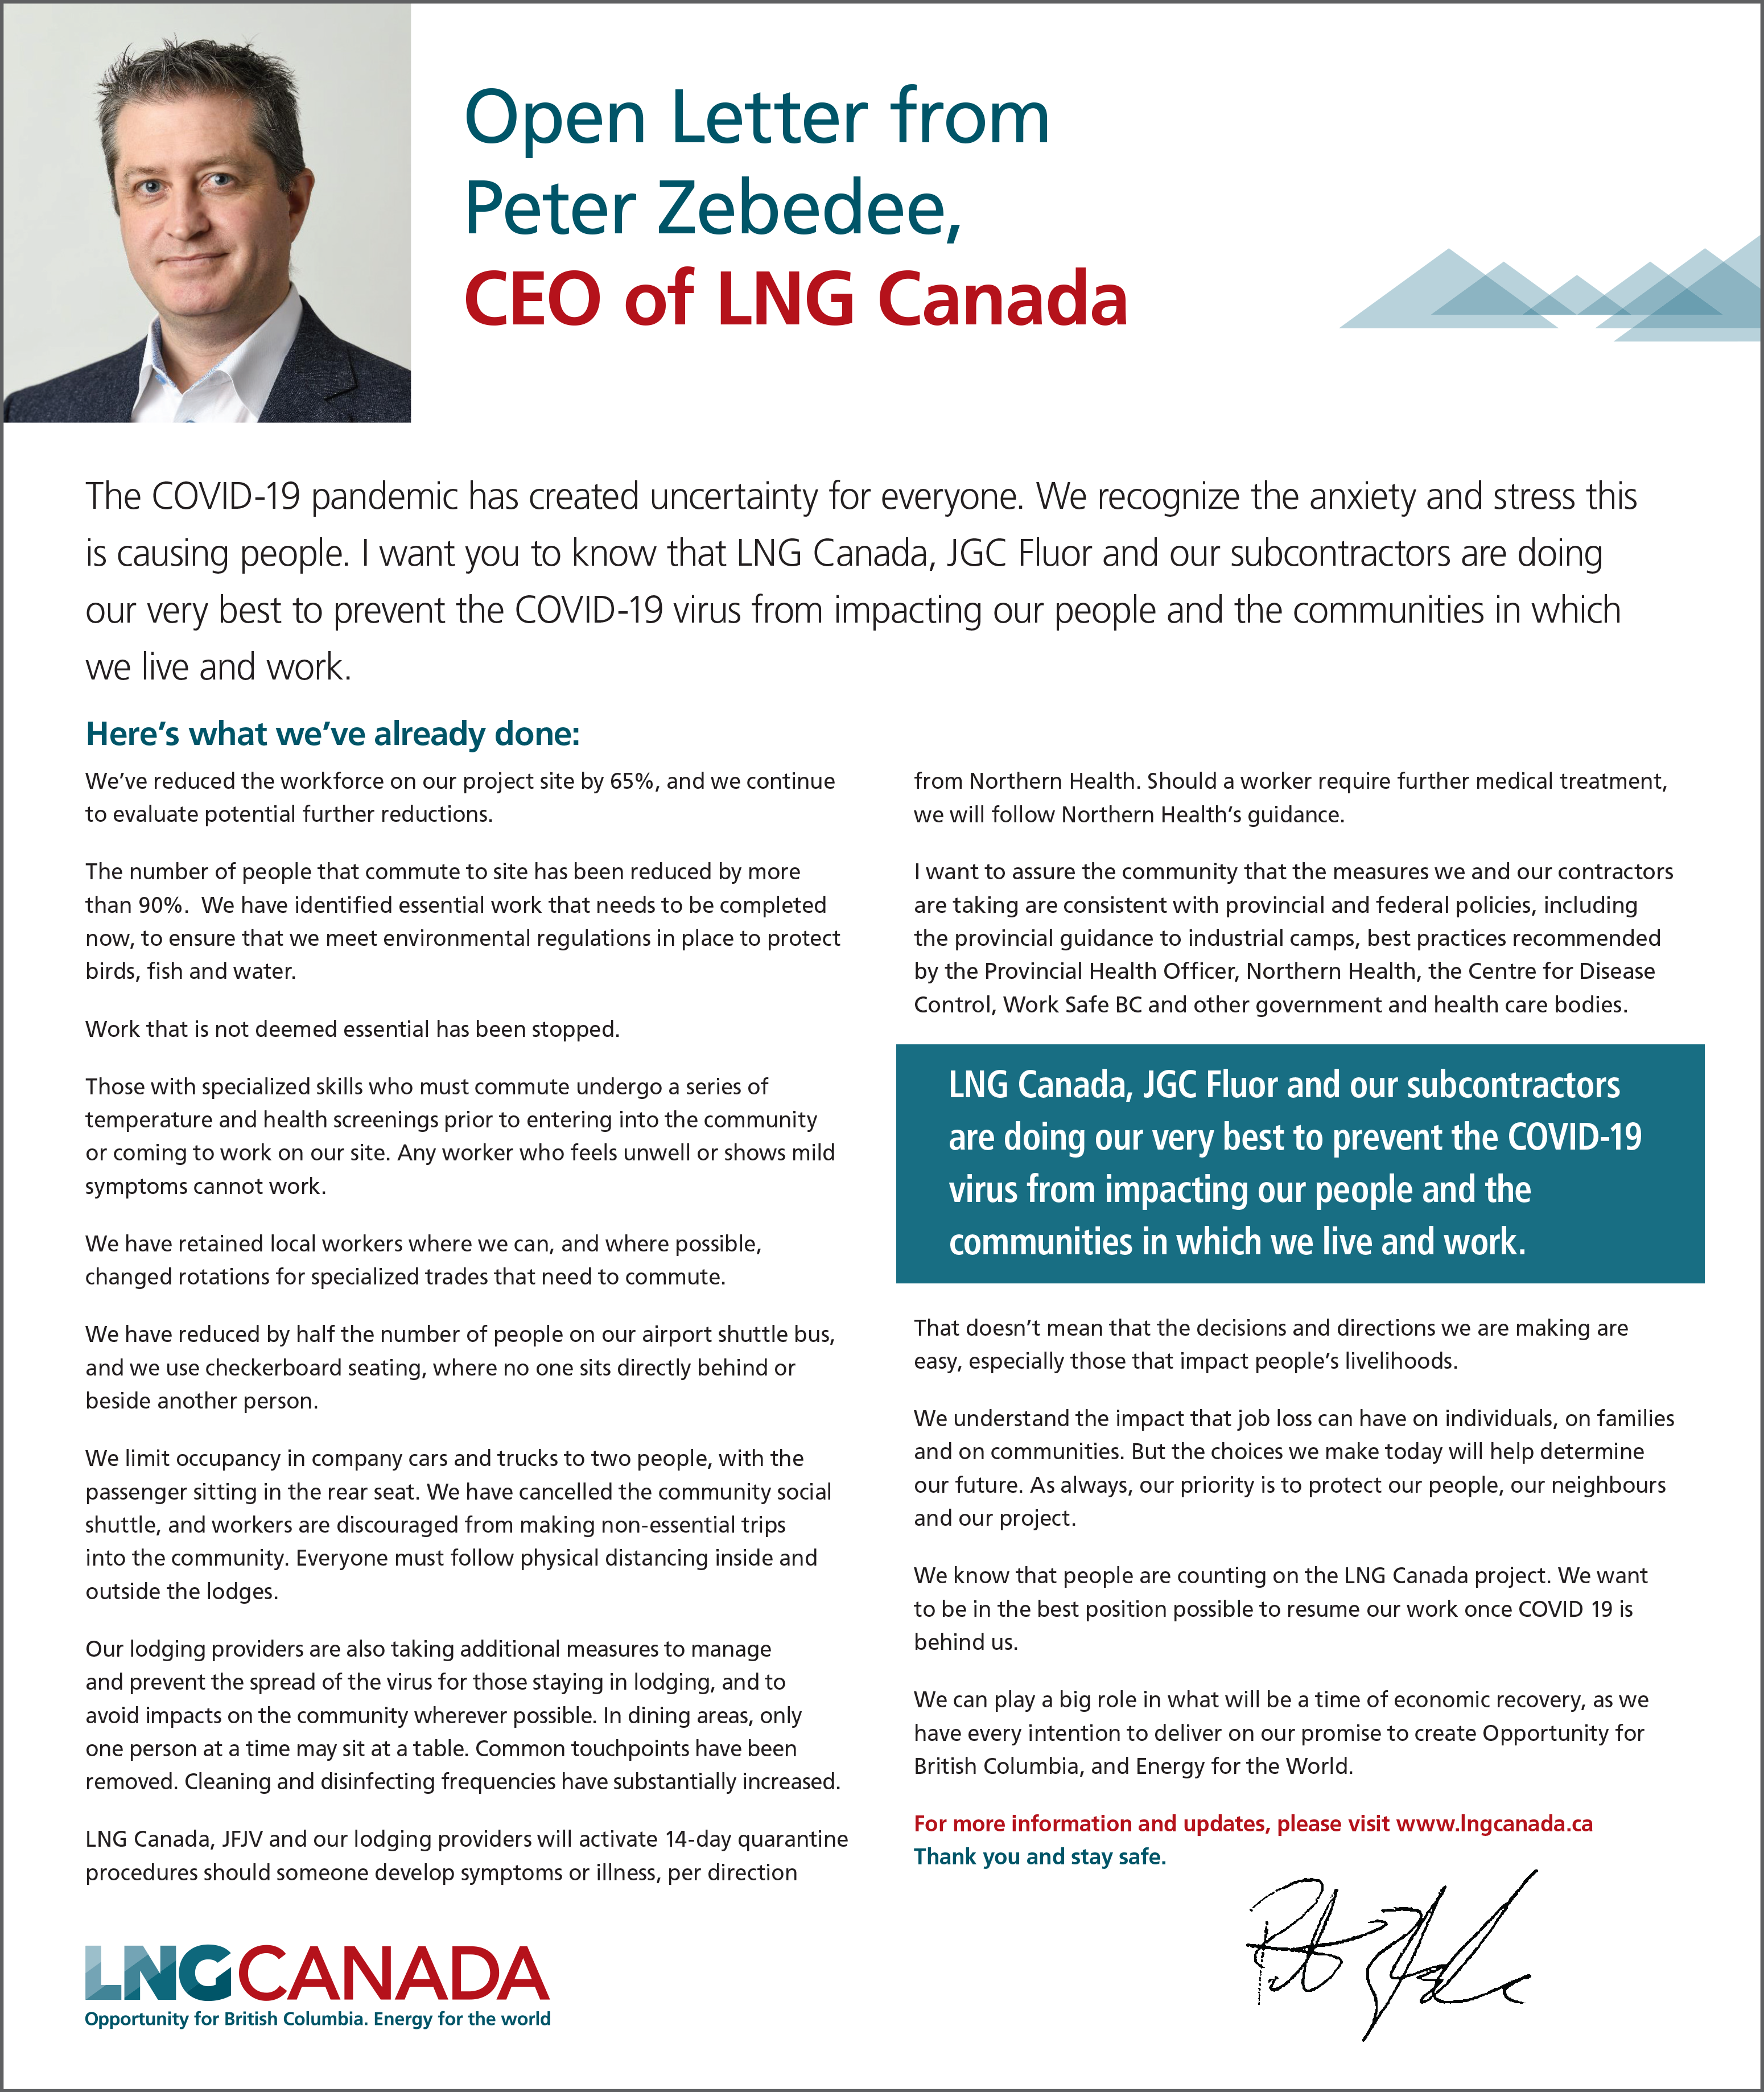 Open Letter from Peter Zebedee, CEO of LNG Canada